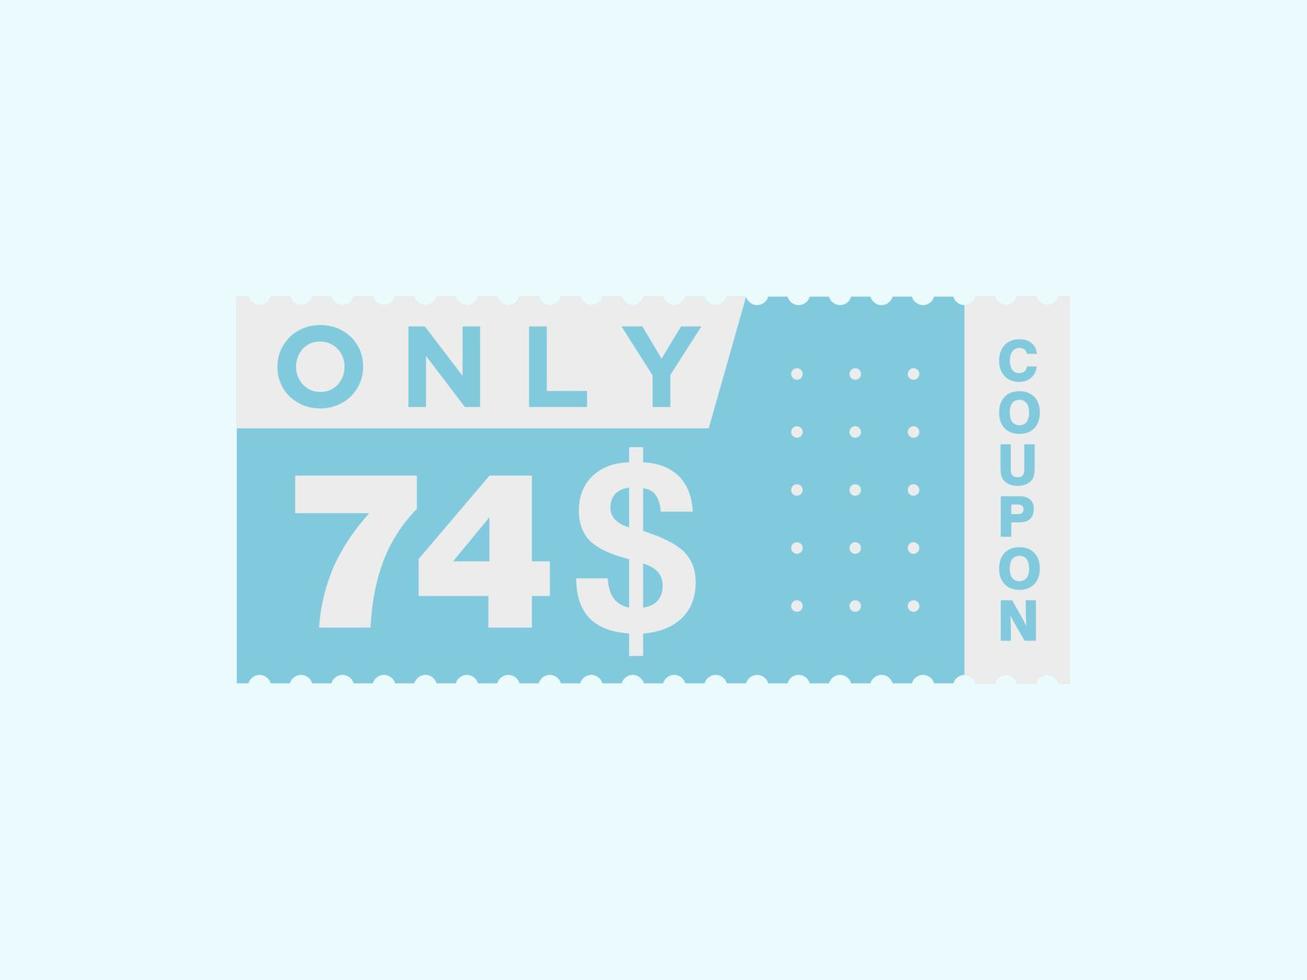 74 Dollar Only Coupon sign or Label or discount voucher Money Saving label, with coupon vector illustration summer offer ends weekend holiday